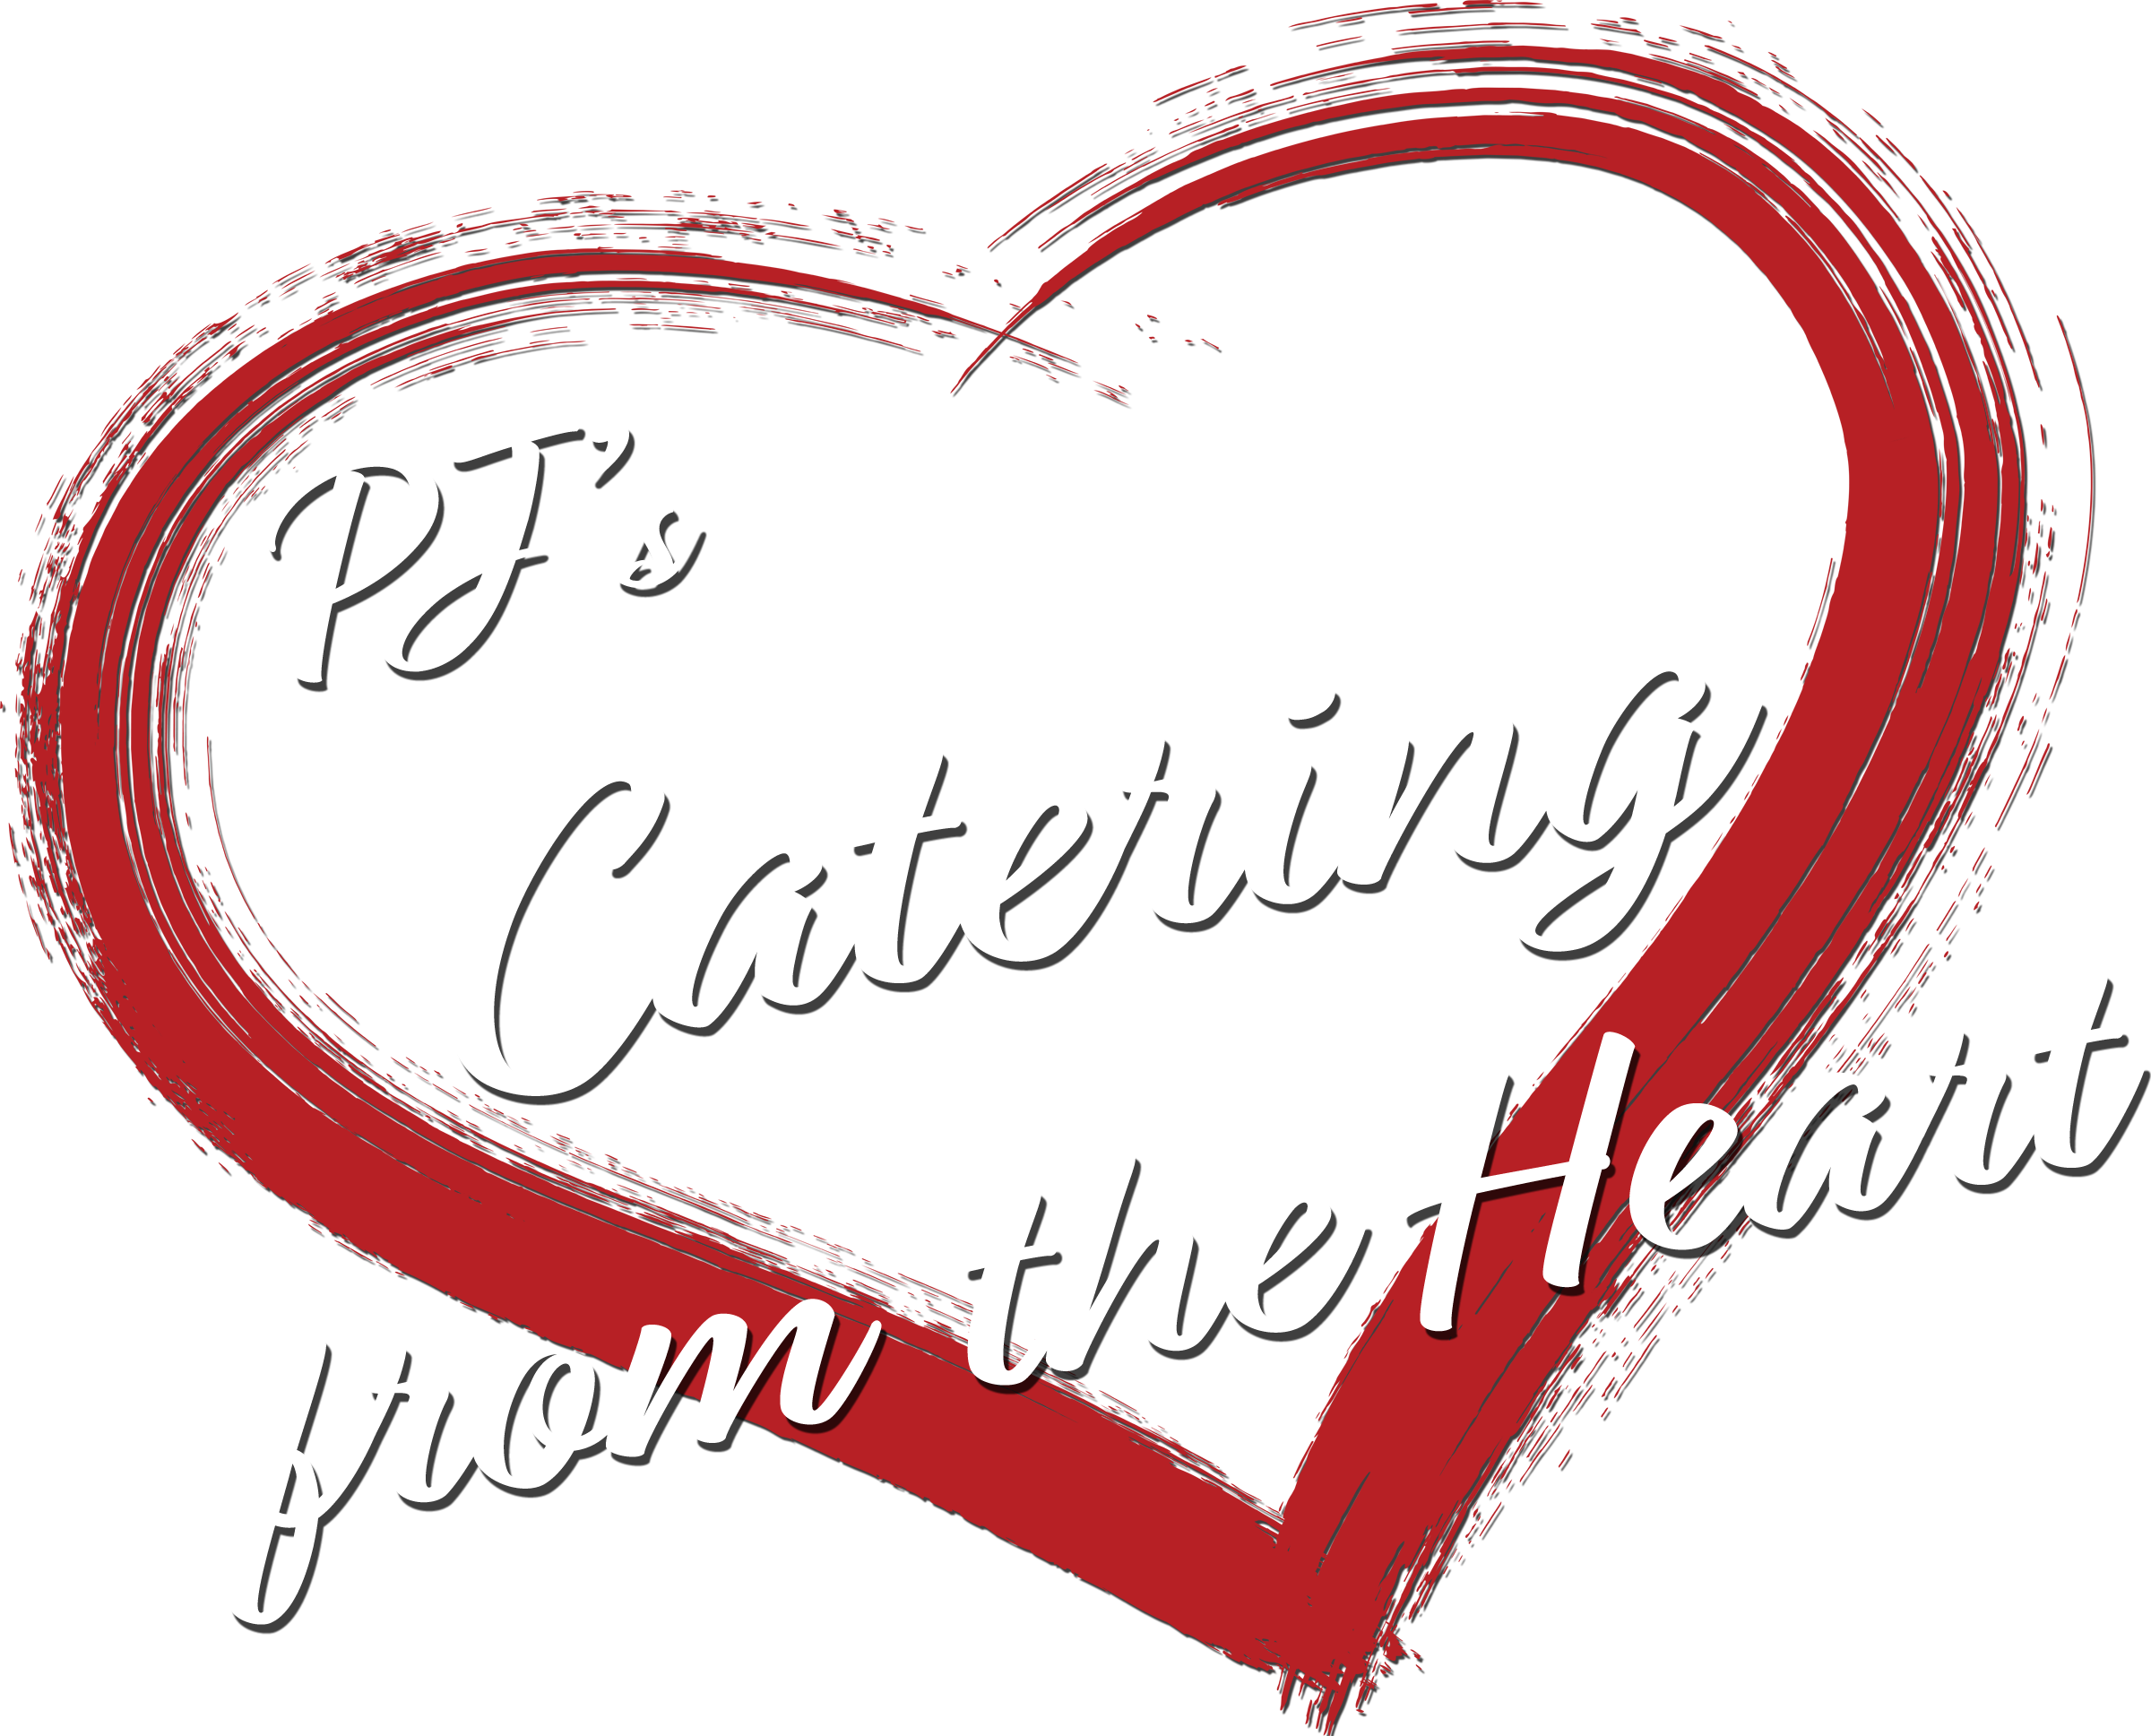 PJ&#39;s Catering from the Heart